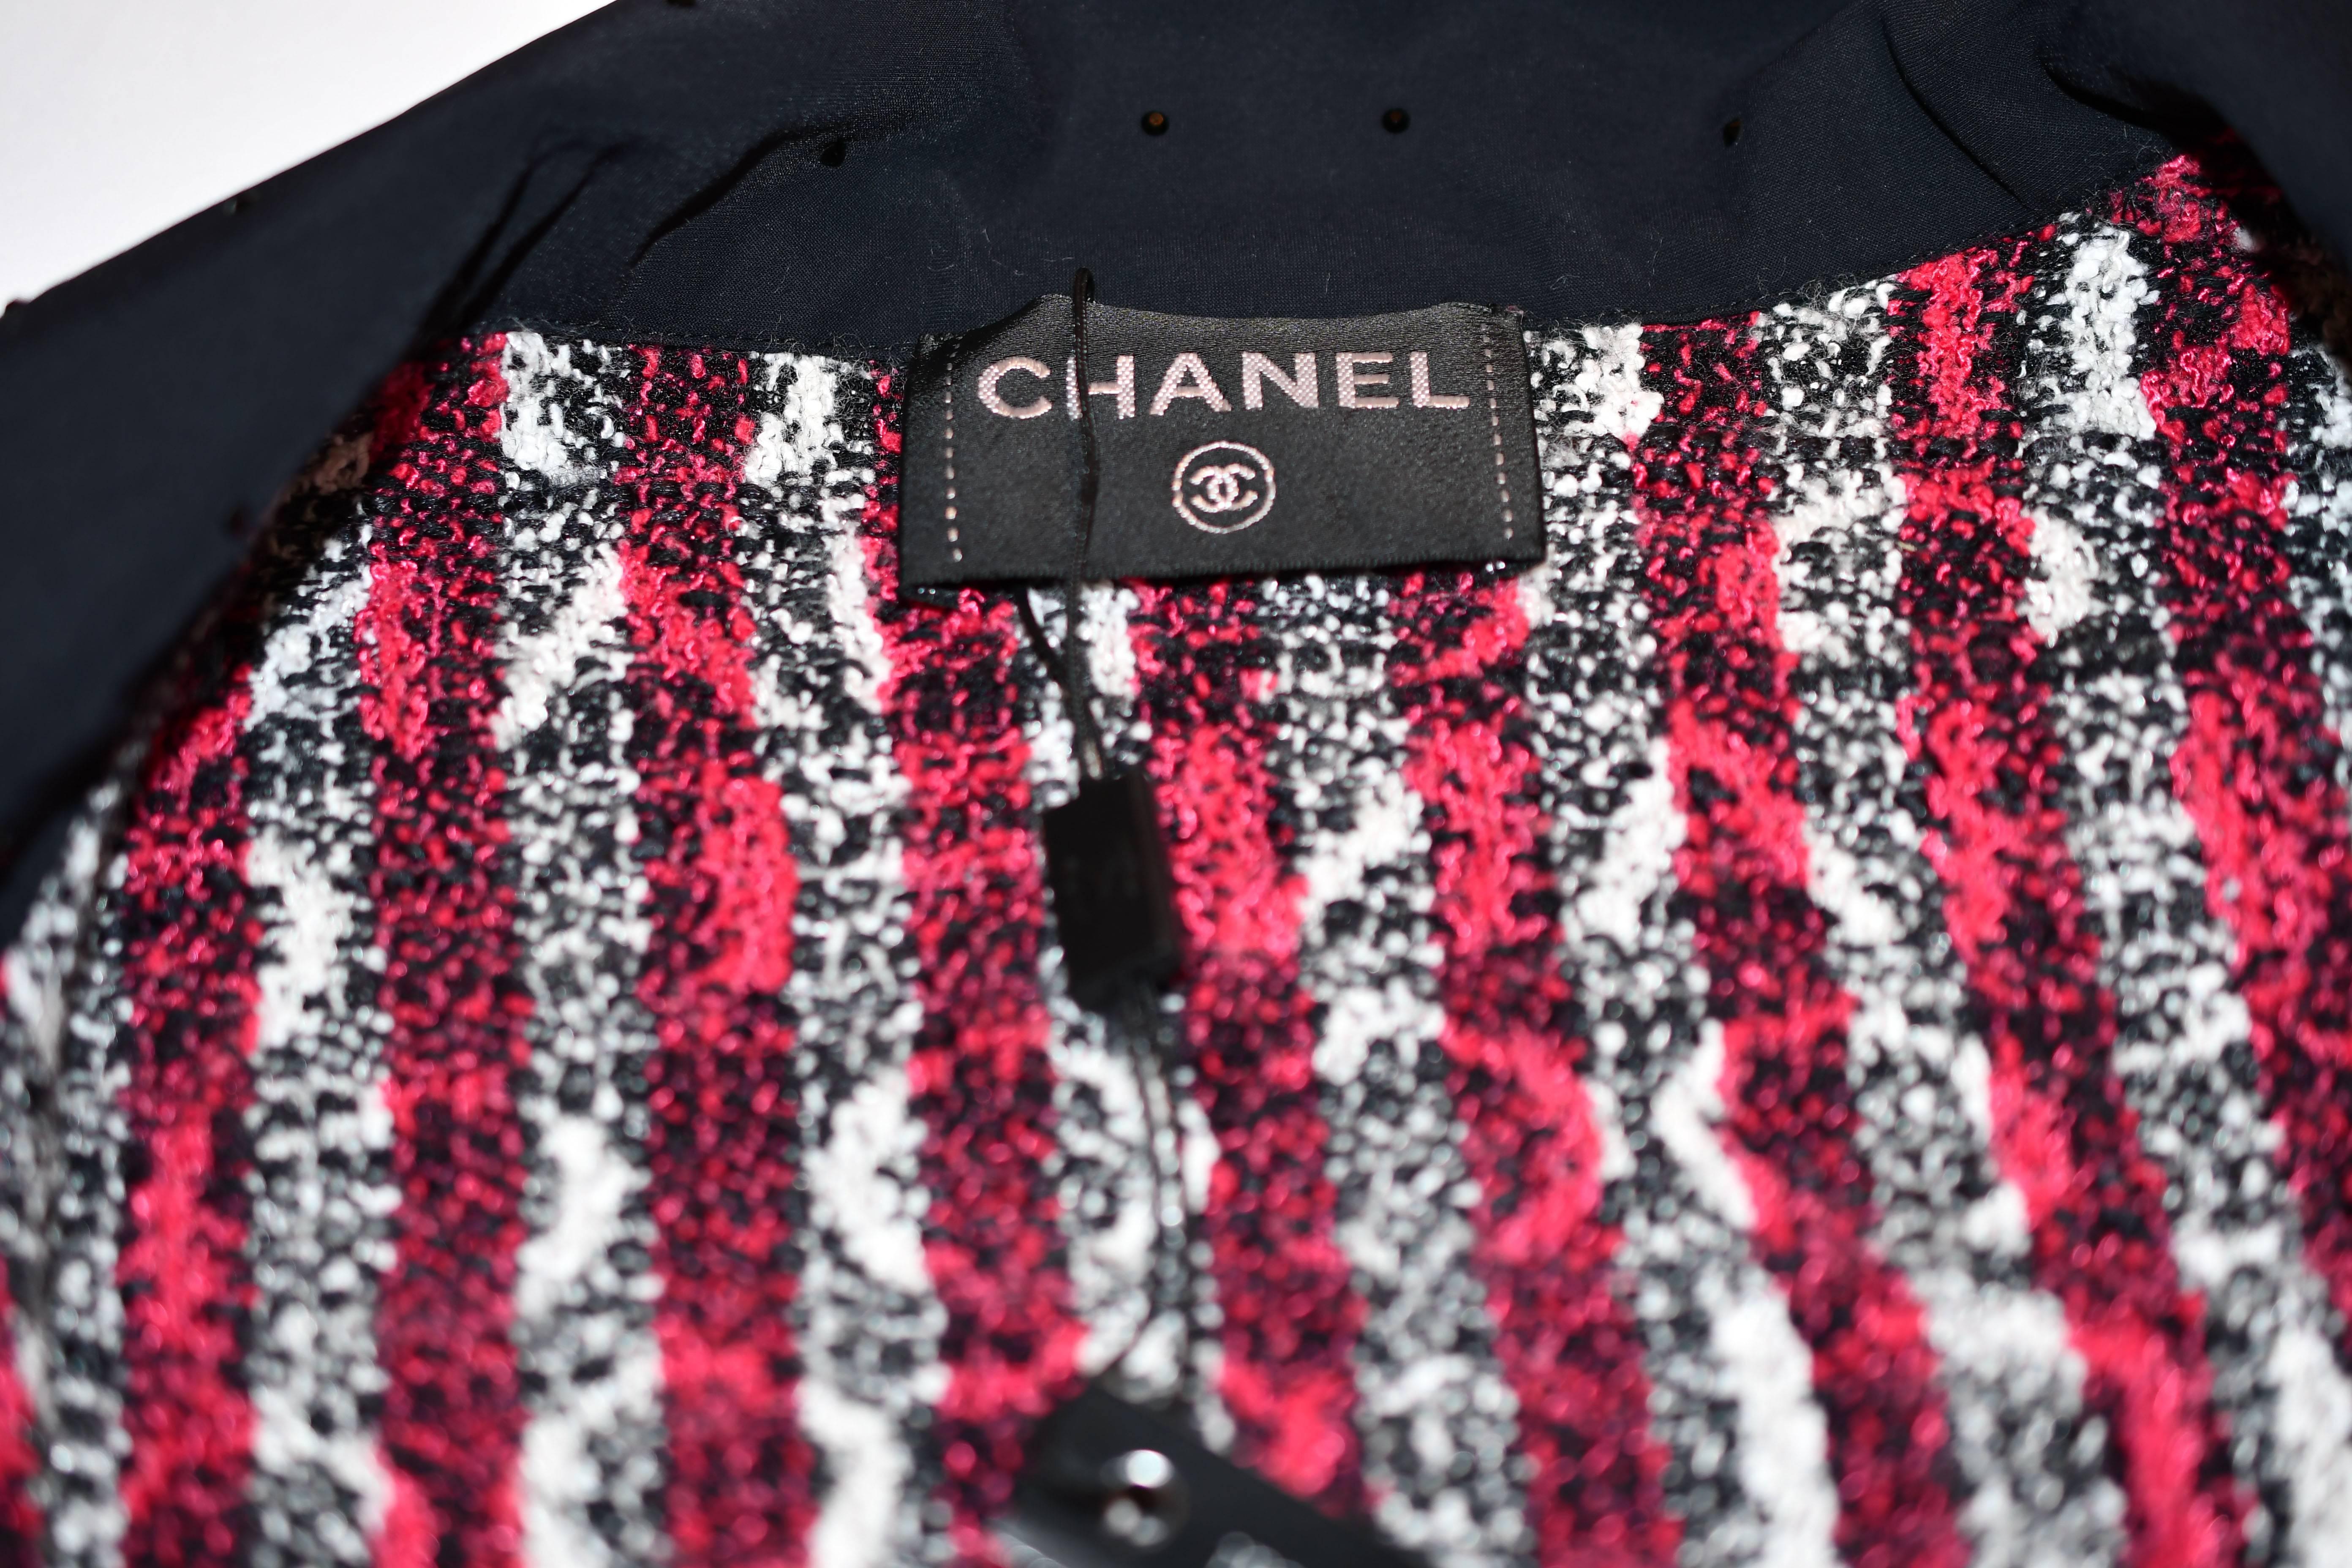 Women's Chanel Red/White Stripe Jacket with Black Trim and Embossed 